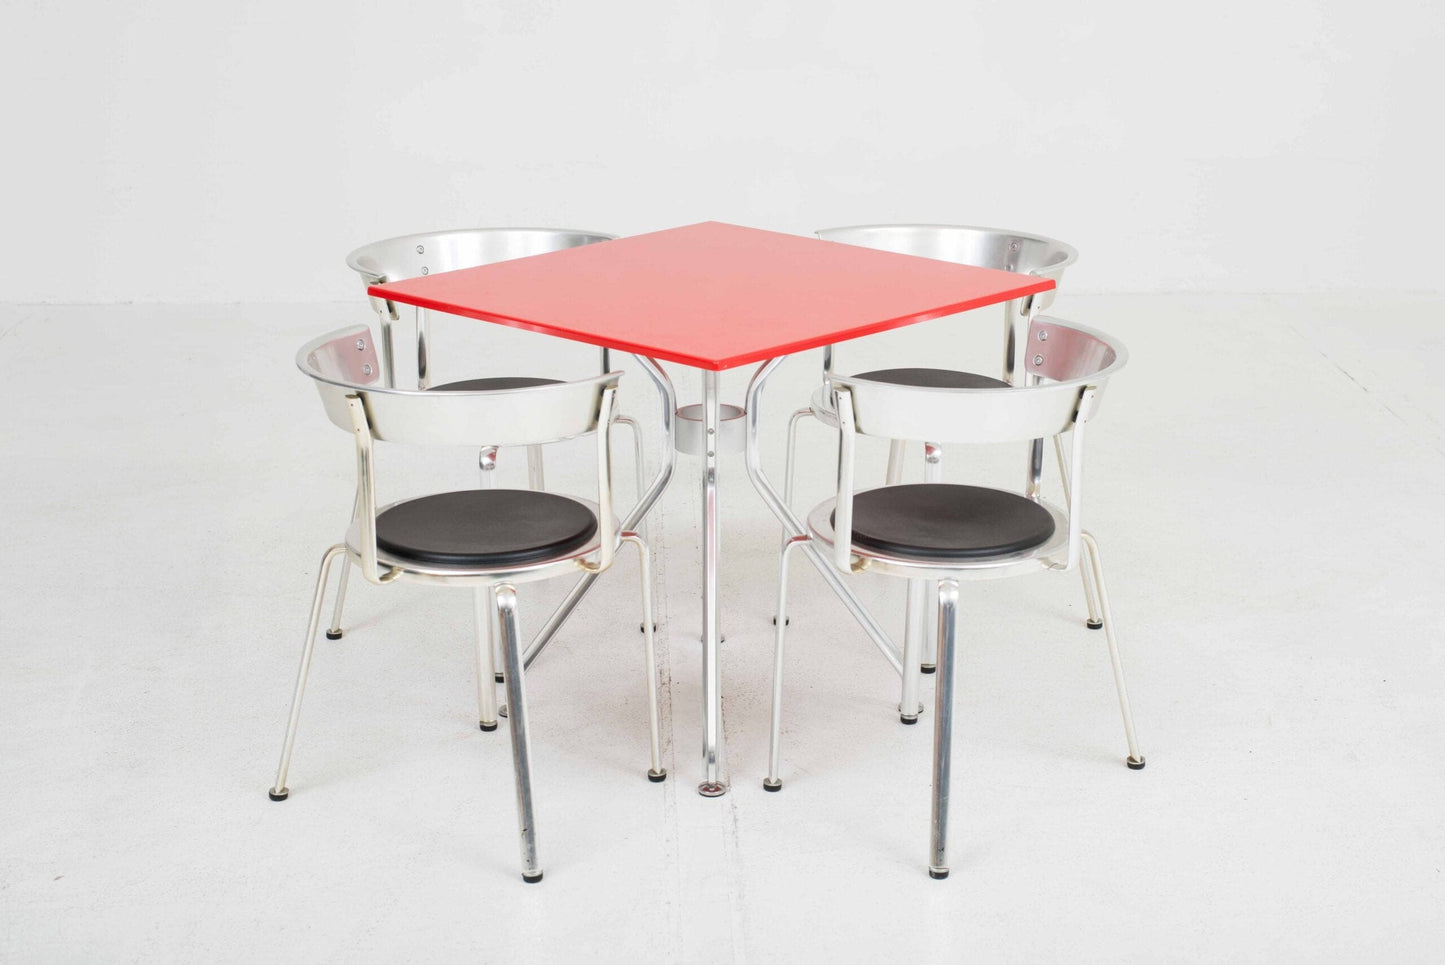 Seledue garden table Alu4 by Kurt Thut in fire red and square Vintage